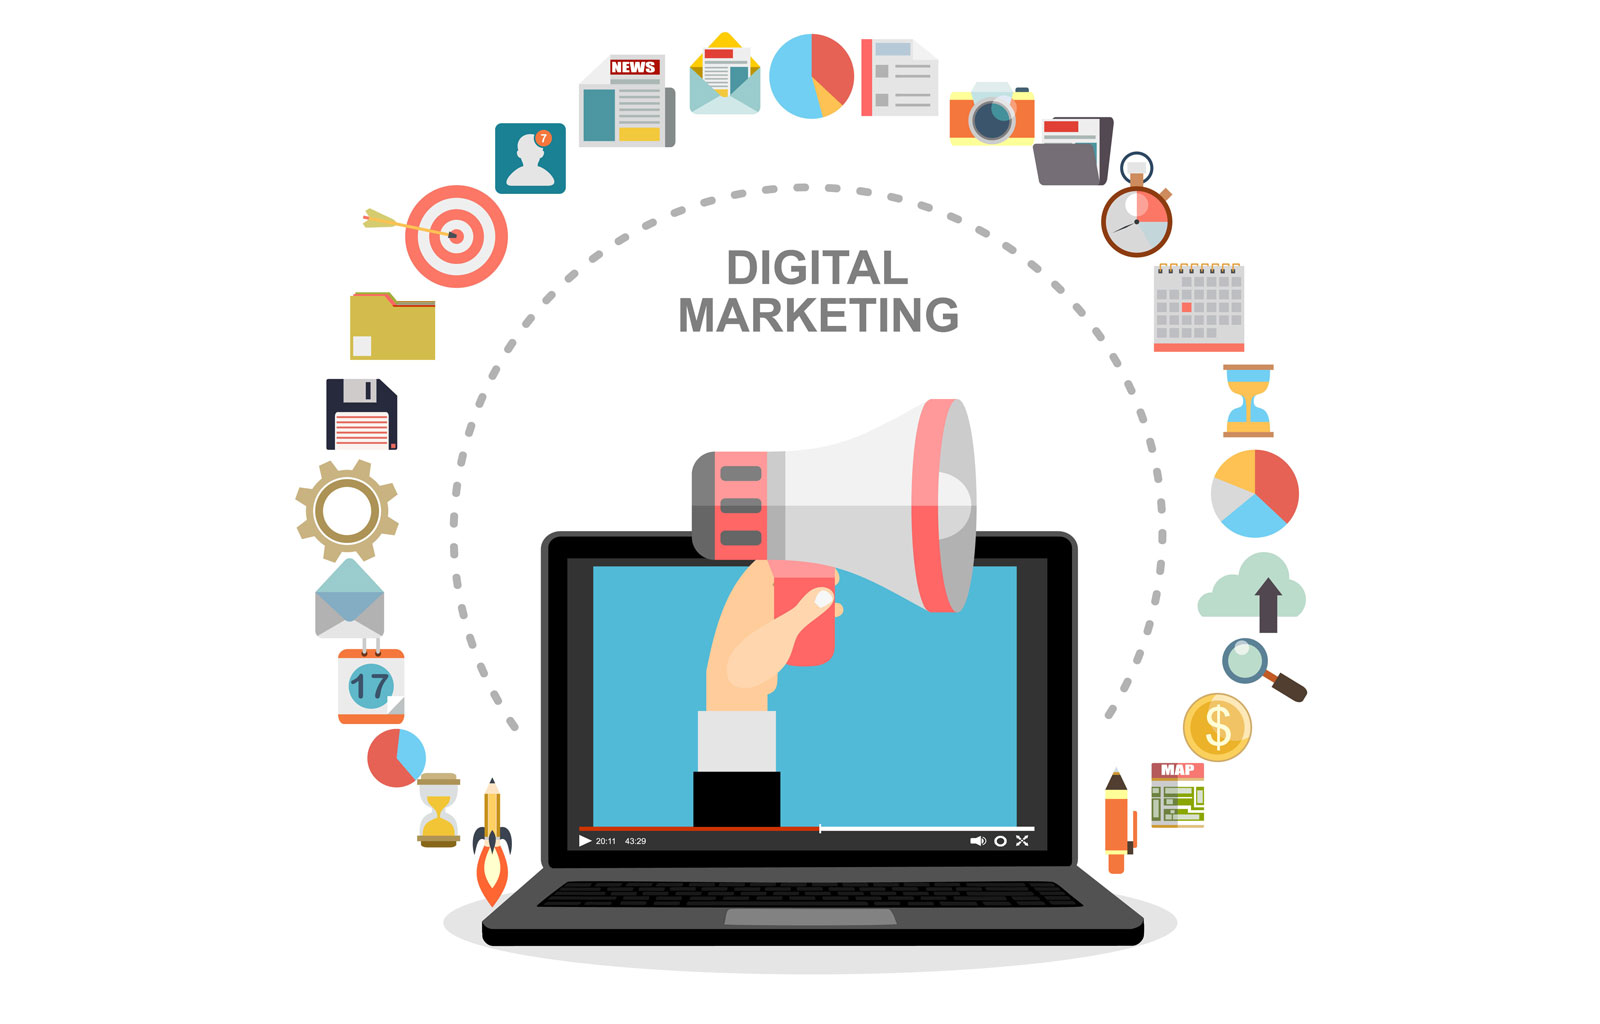 An in-depth analysis of a Digital Marketing Company located in Dubai